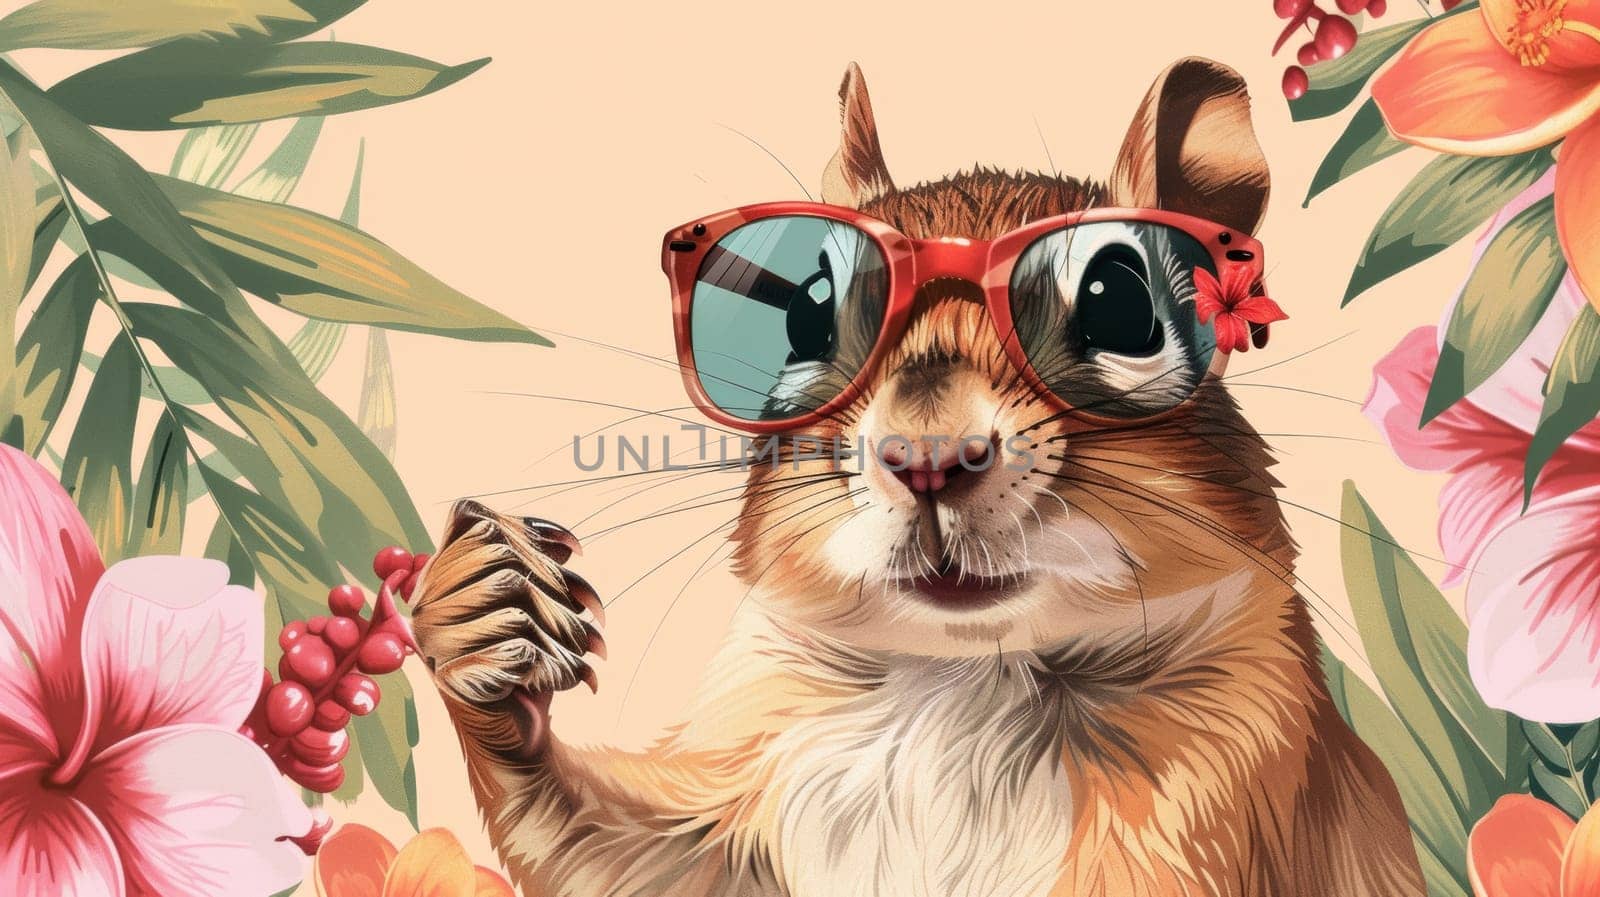 A squirrel wearing sunglasses and a flower crown with flowers